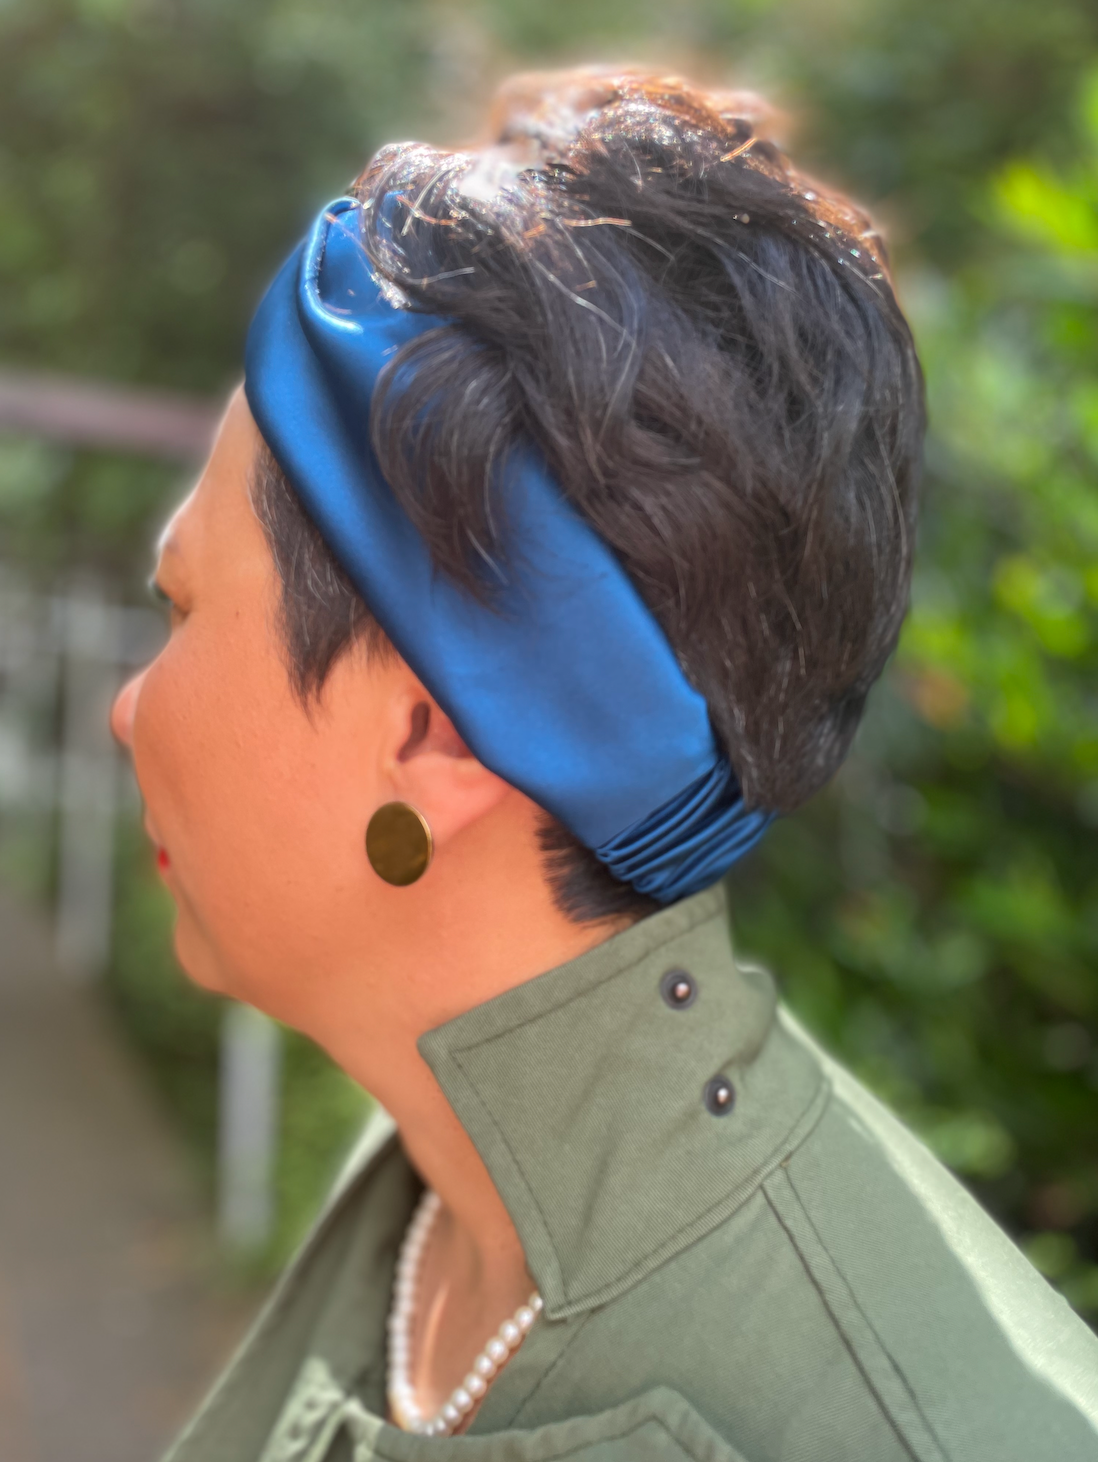 Silk Twisted Turban hairband and neck scarf in Peacock Blue Mulberry Silk - 100% pure silk satin